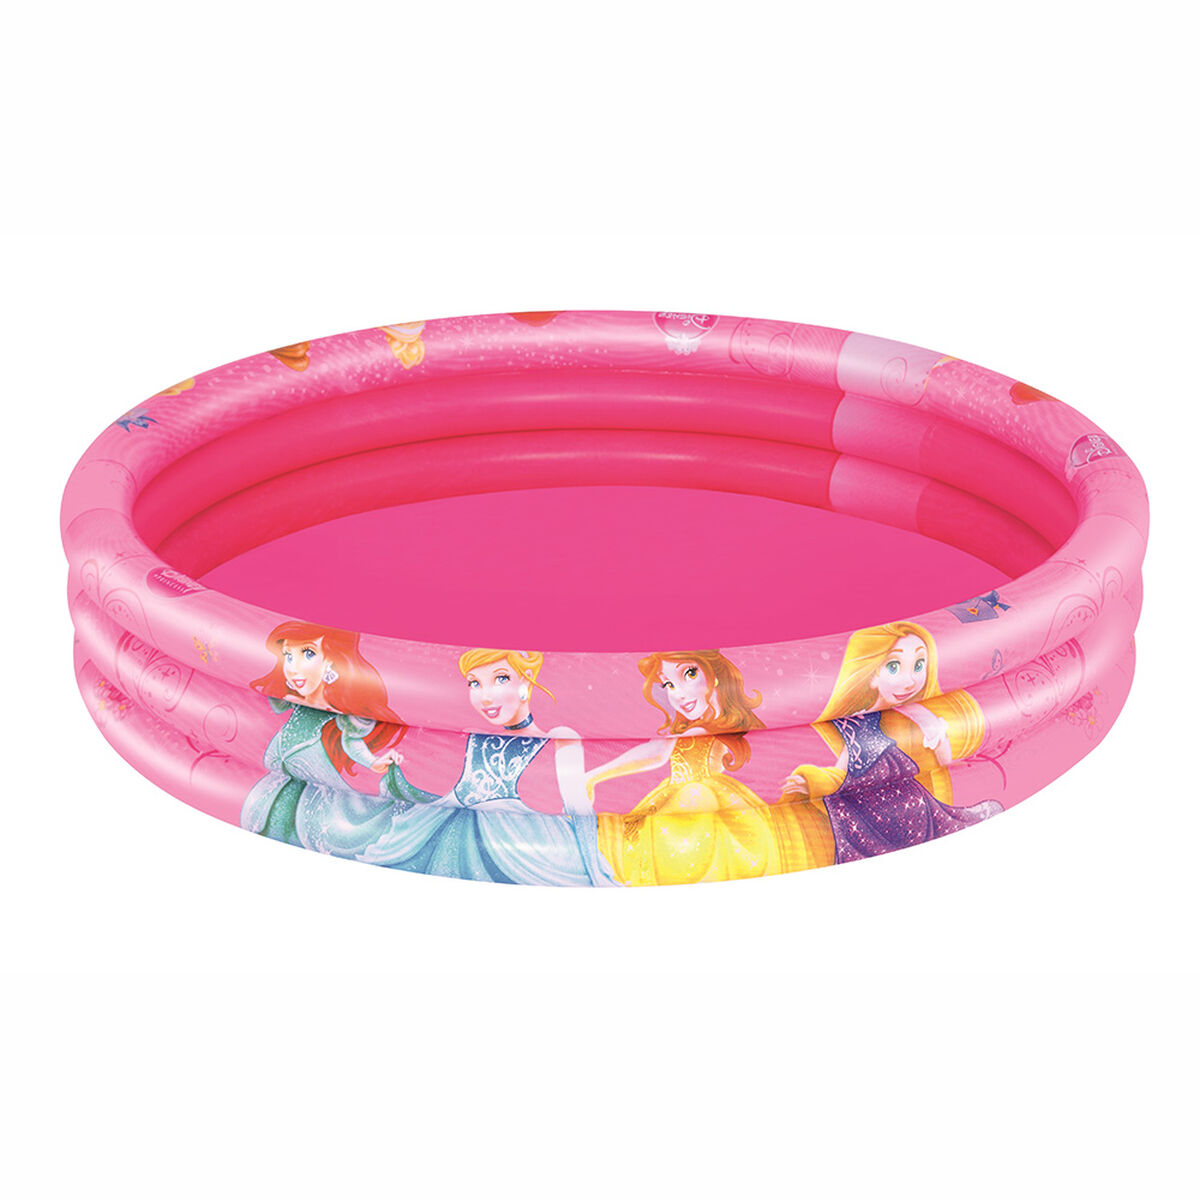 Piscina Inflable Bestway 3 Anillos Princesas